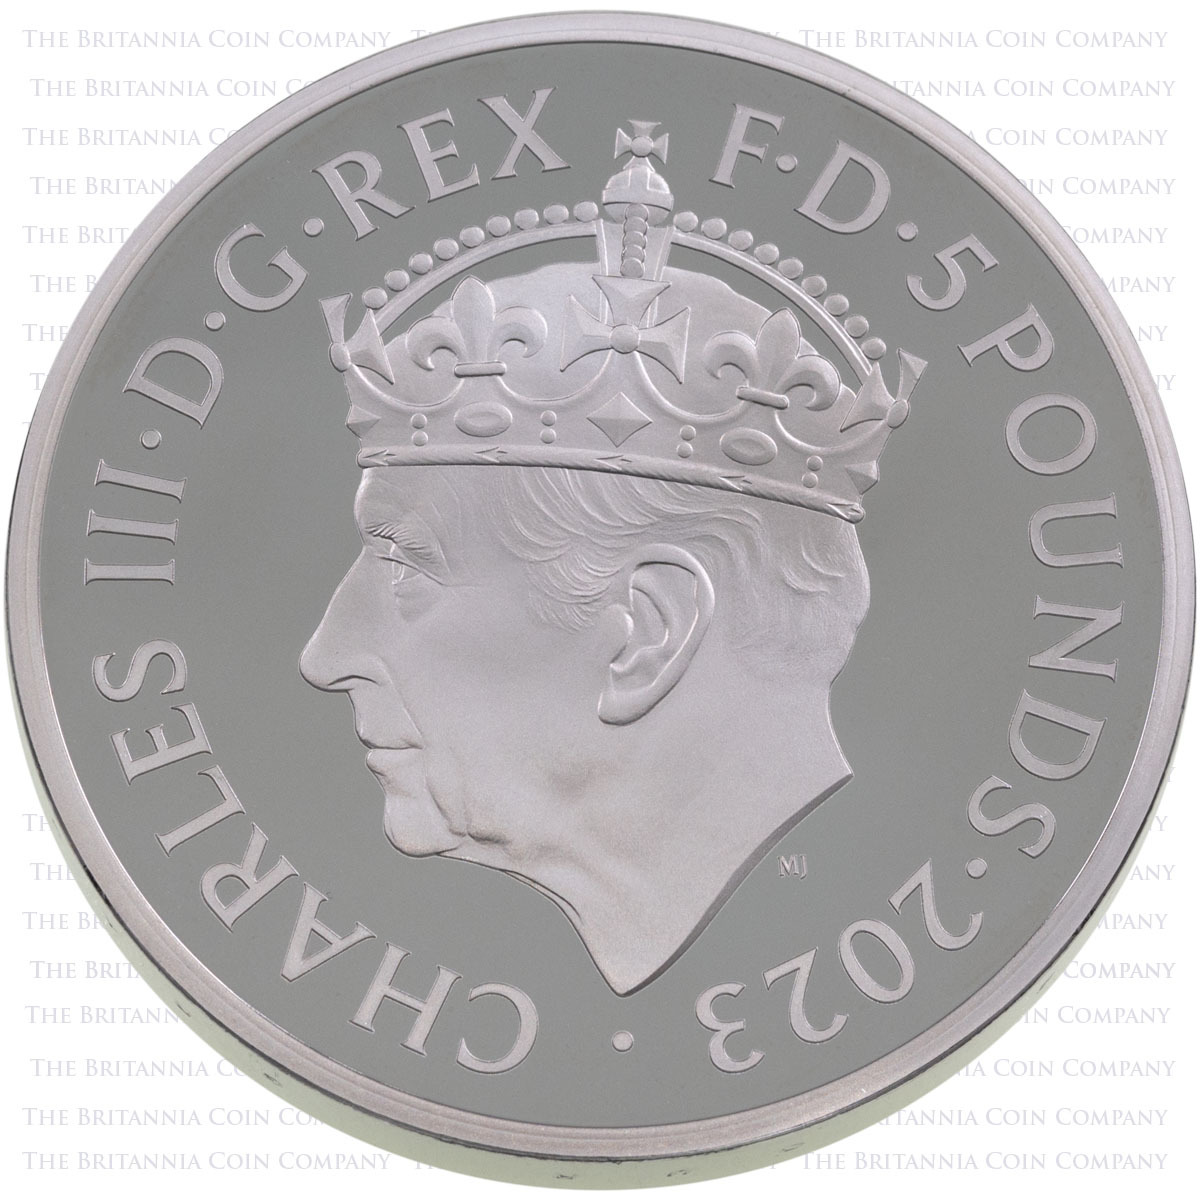 UK23KCSP 2023 King Charles III Coronation Five Pound Crown Silver Proof Coin Obverse